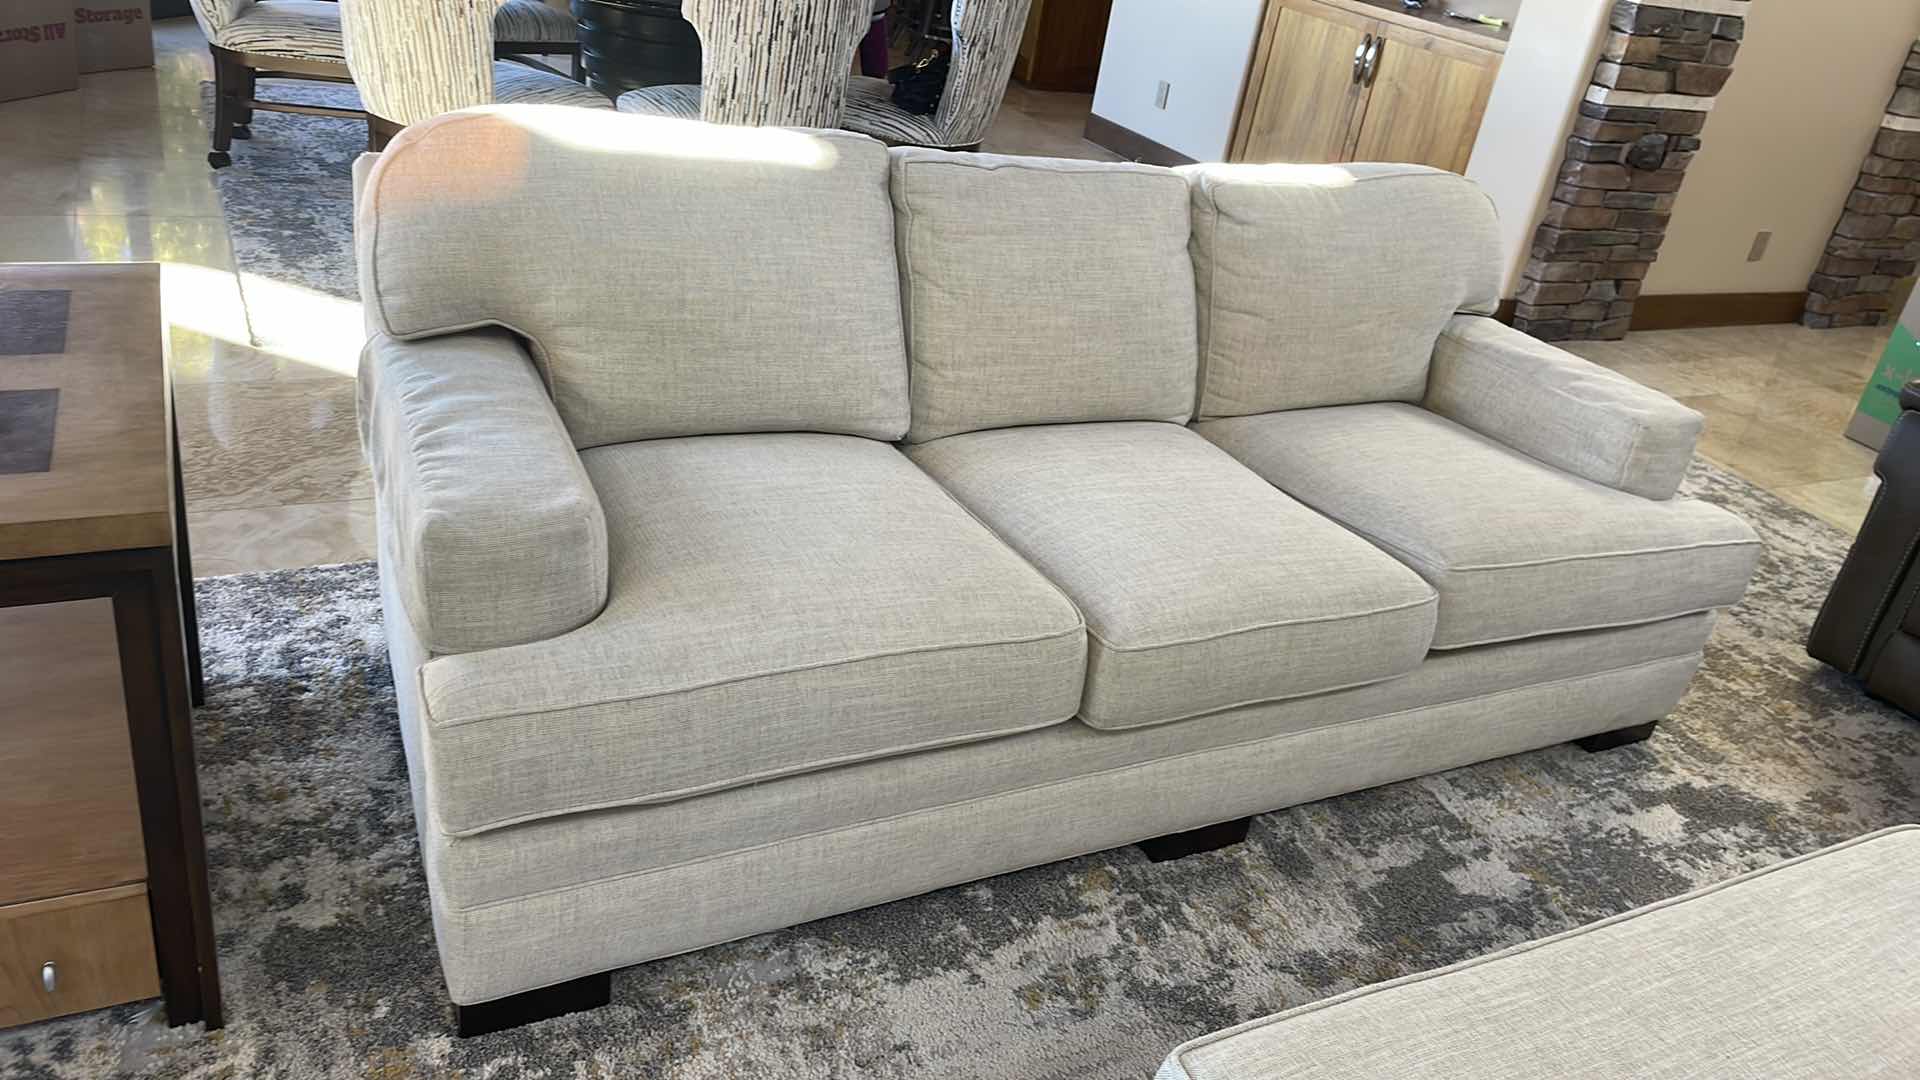 Photo 2 of TAYLOR MADE SOFA BY TAYLOR KING ATTACHED BACK CUSHIONS LAMSON LINEN FINISH FABRIC 87” X 40”